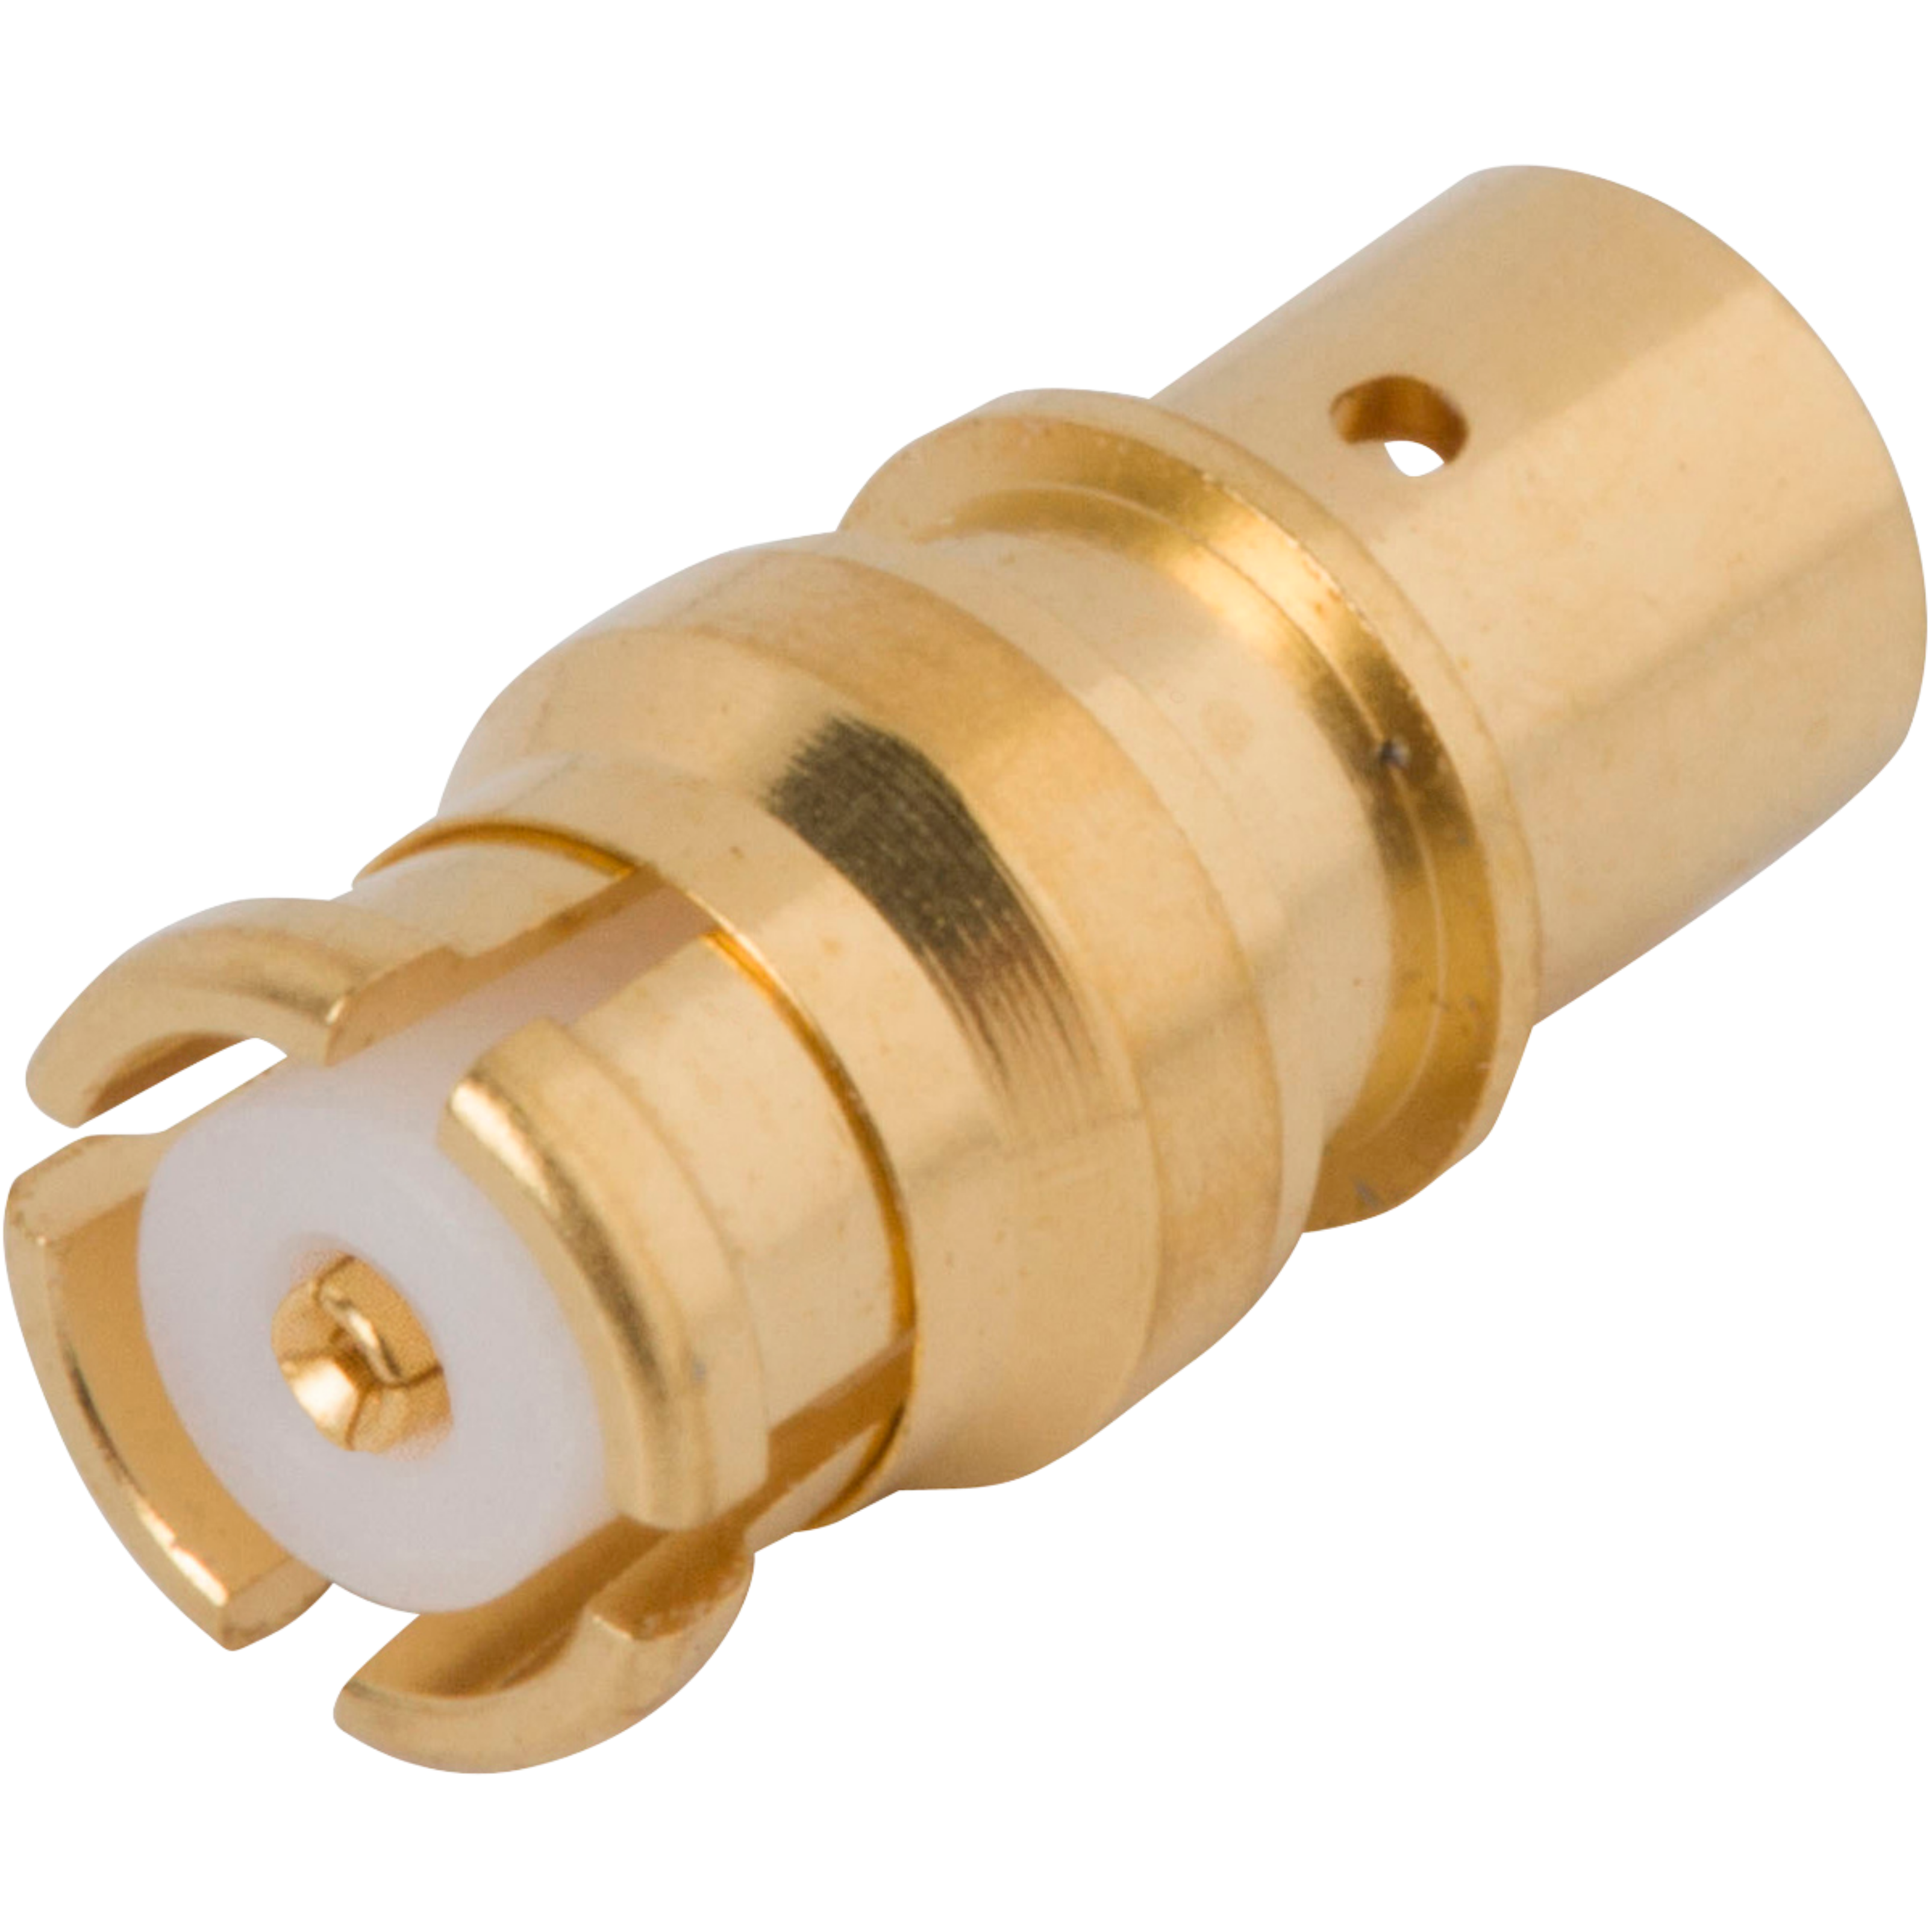 SMP Female Connector for RG-178 Cable, 1221-4004